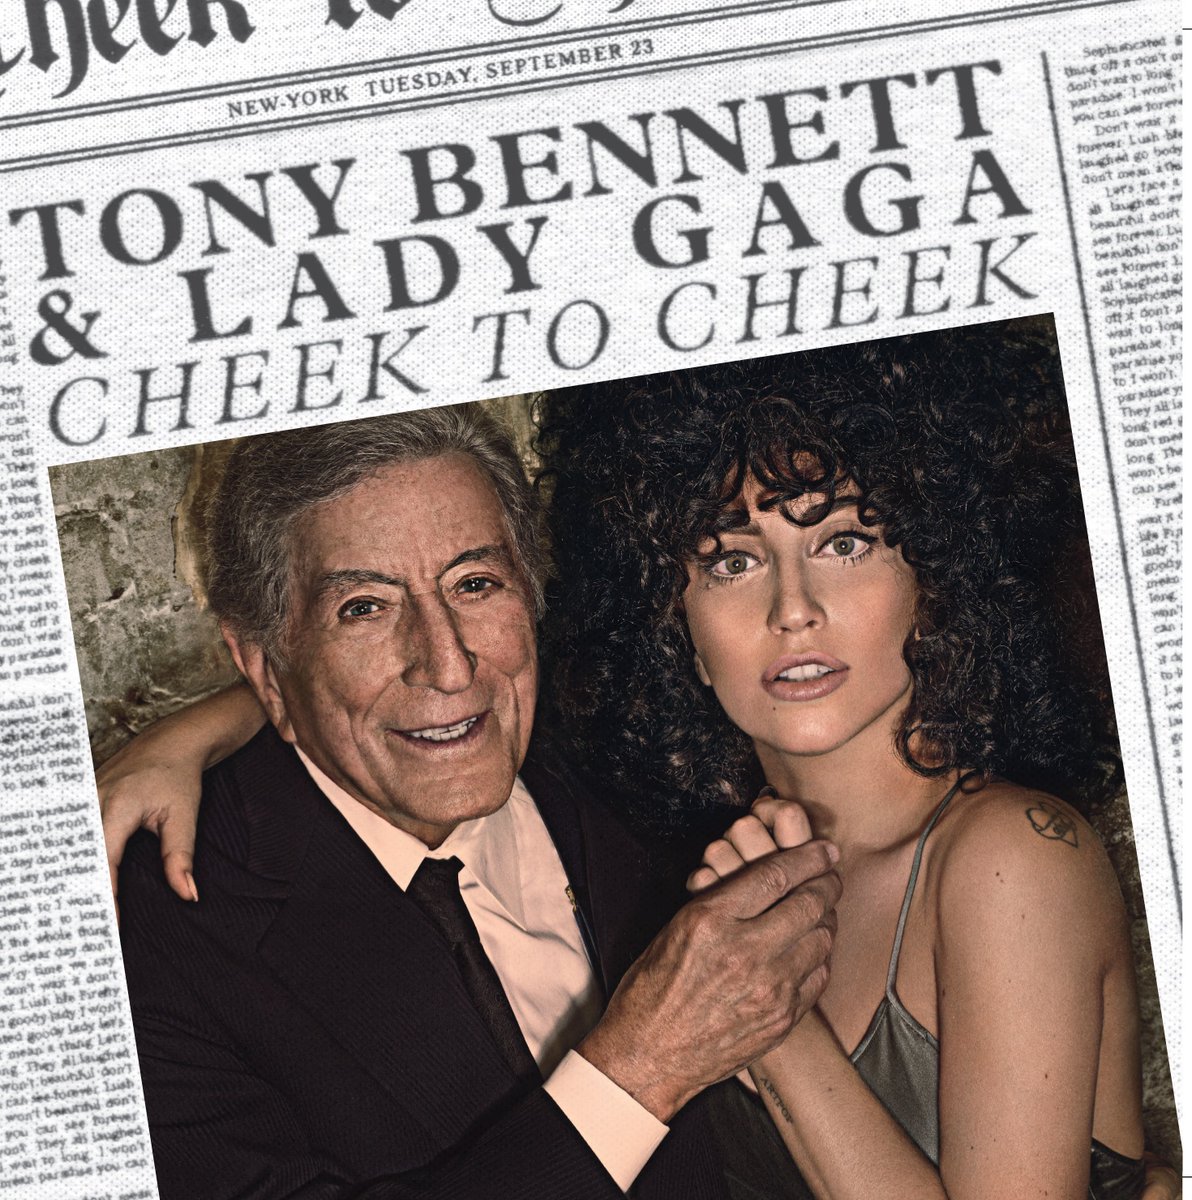 It's been 6 years since Cheek to Cheek. While we can't dance that way right now, I'm thinking about my dear friend @ladygaga and her incredible artistry. TonyBennett.lnk.to/CheekToCheekTP